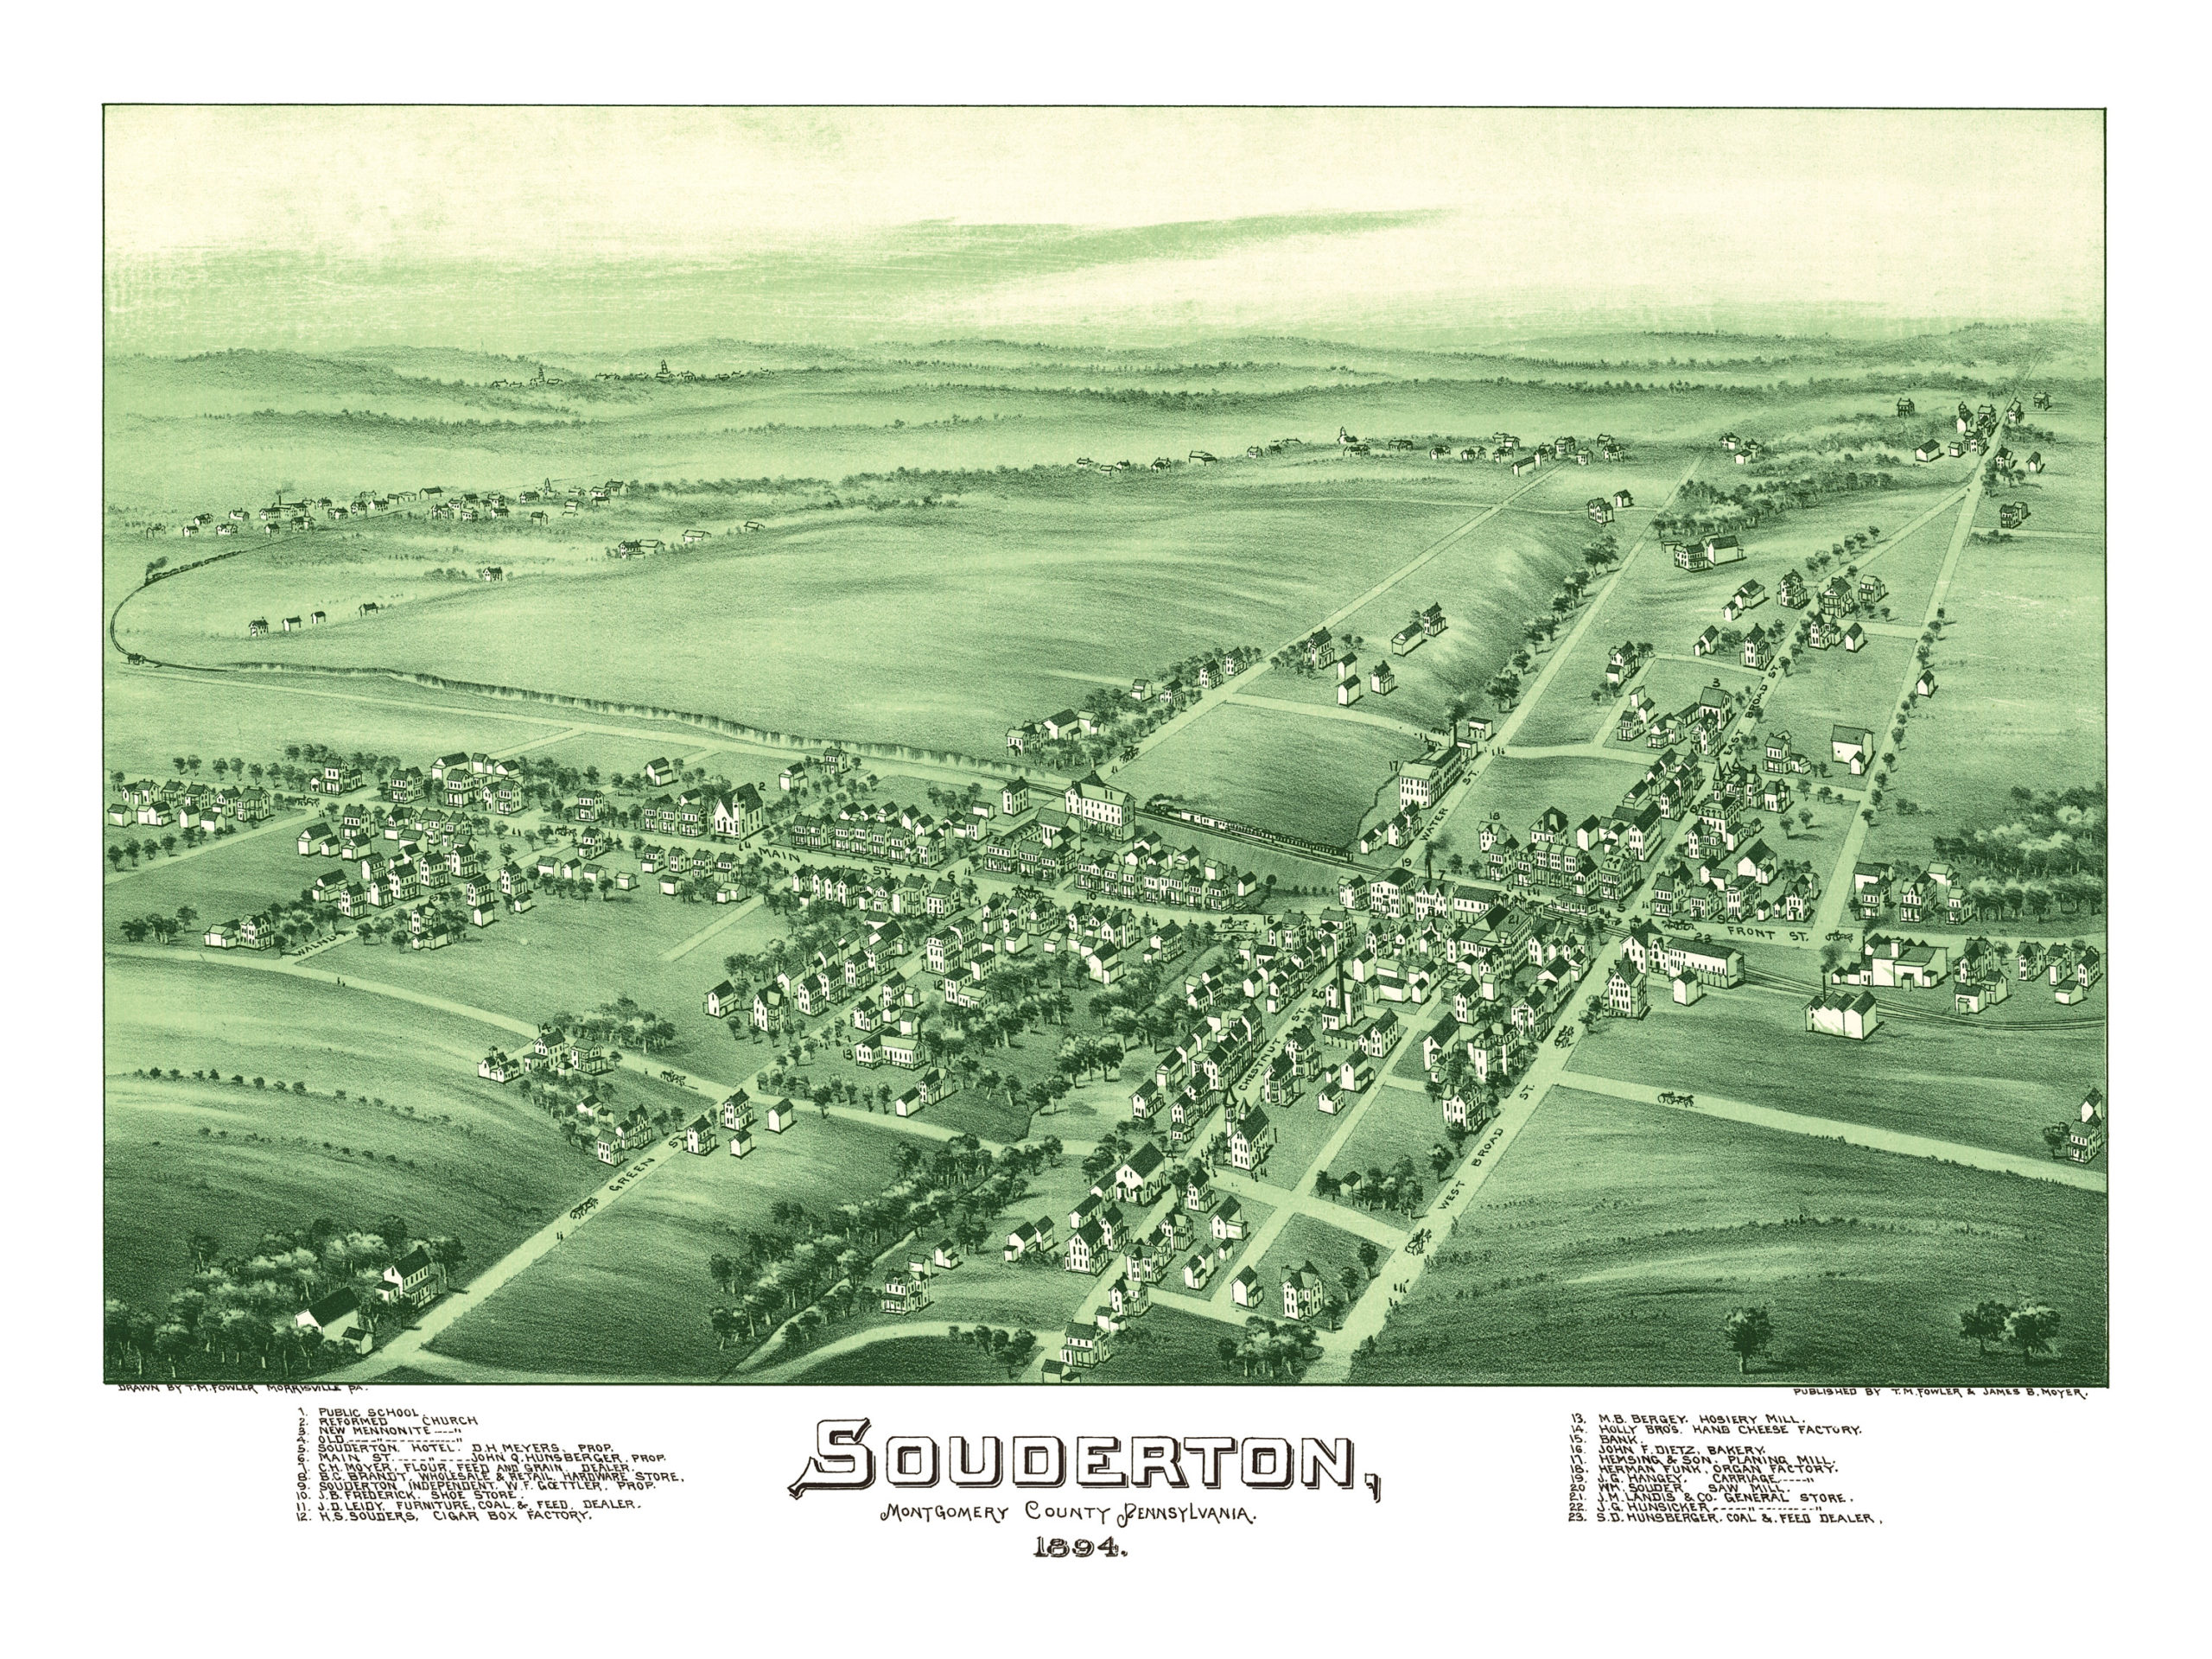 The Early History of Souderton